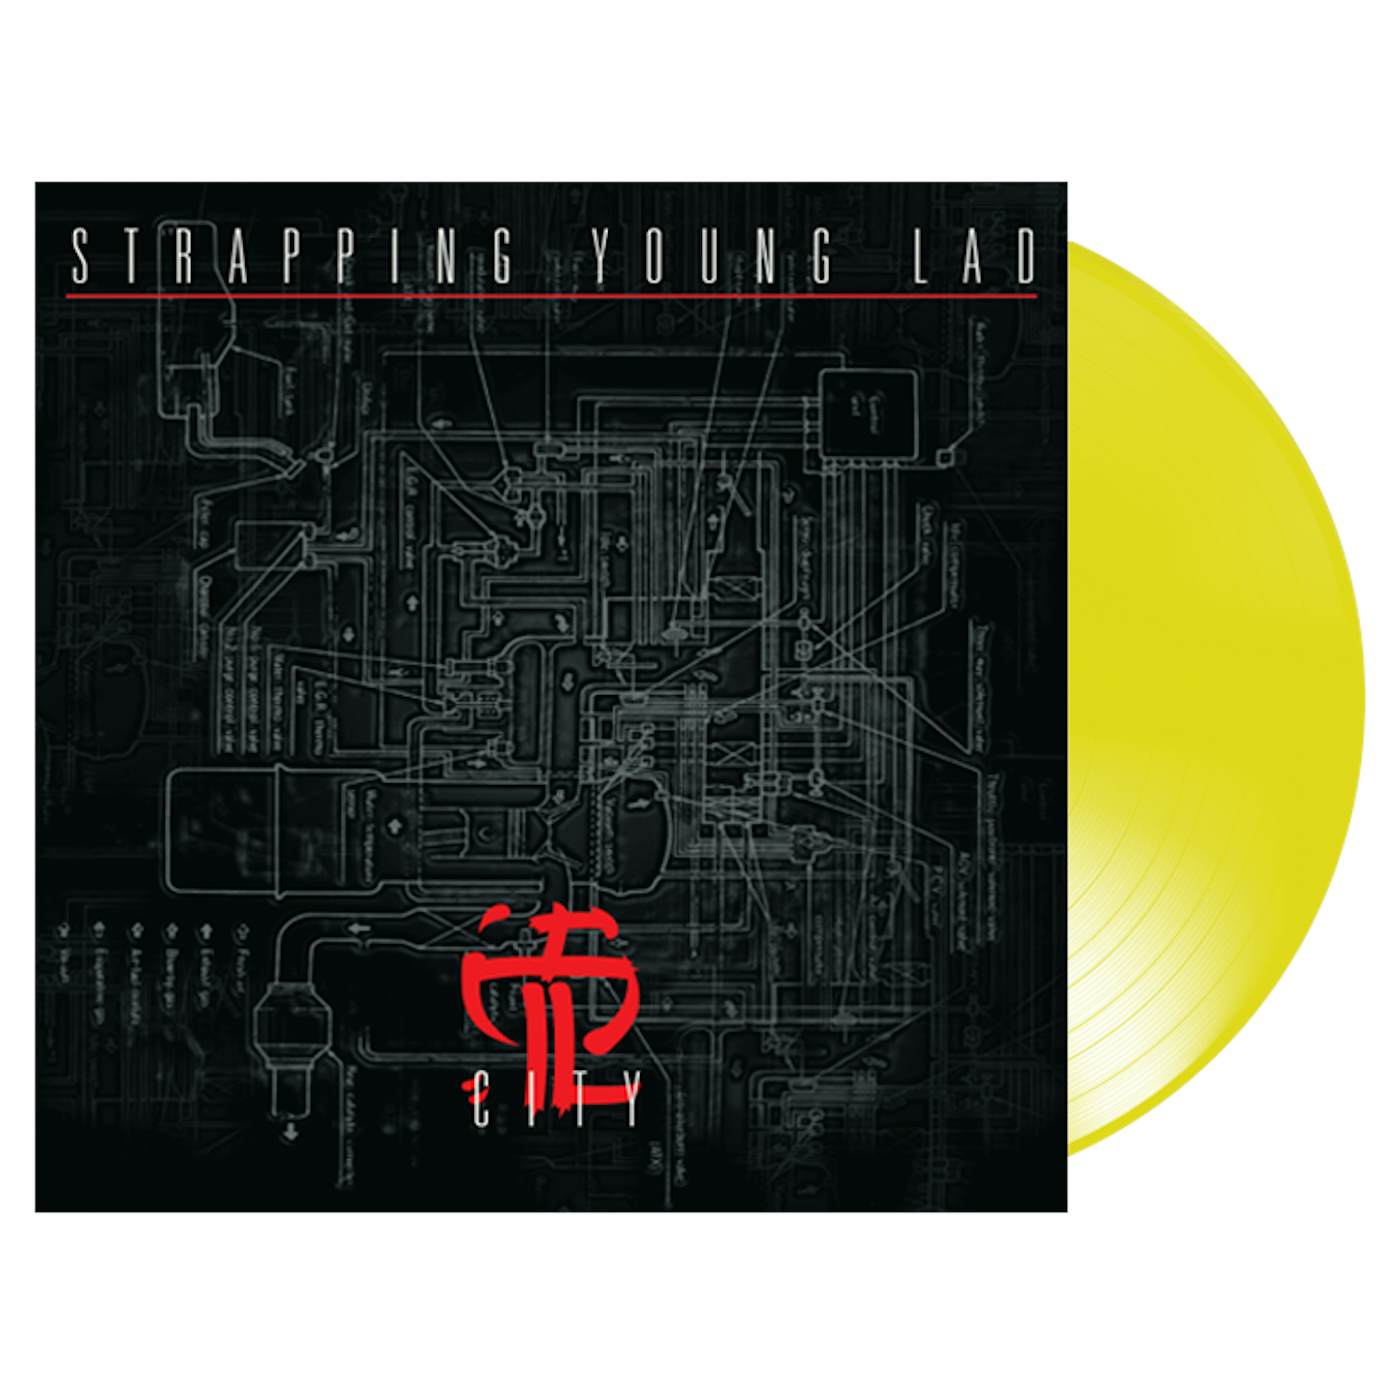  STRAPPING YOUNG LAD - 'City' 2xLP (Neon Yellow)